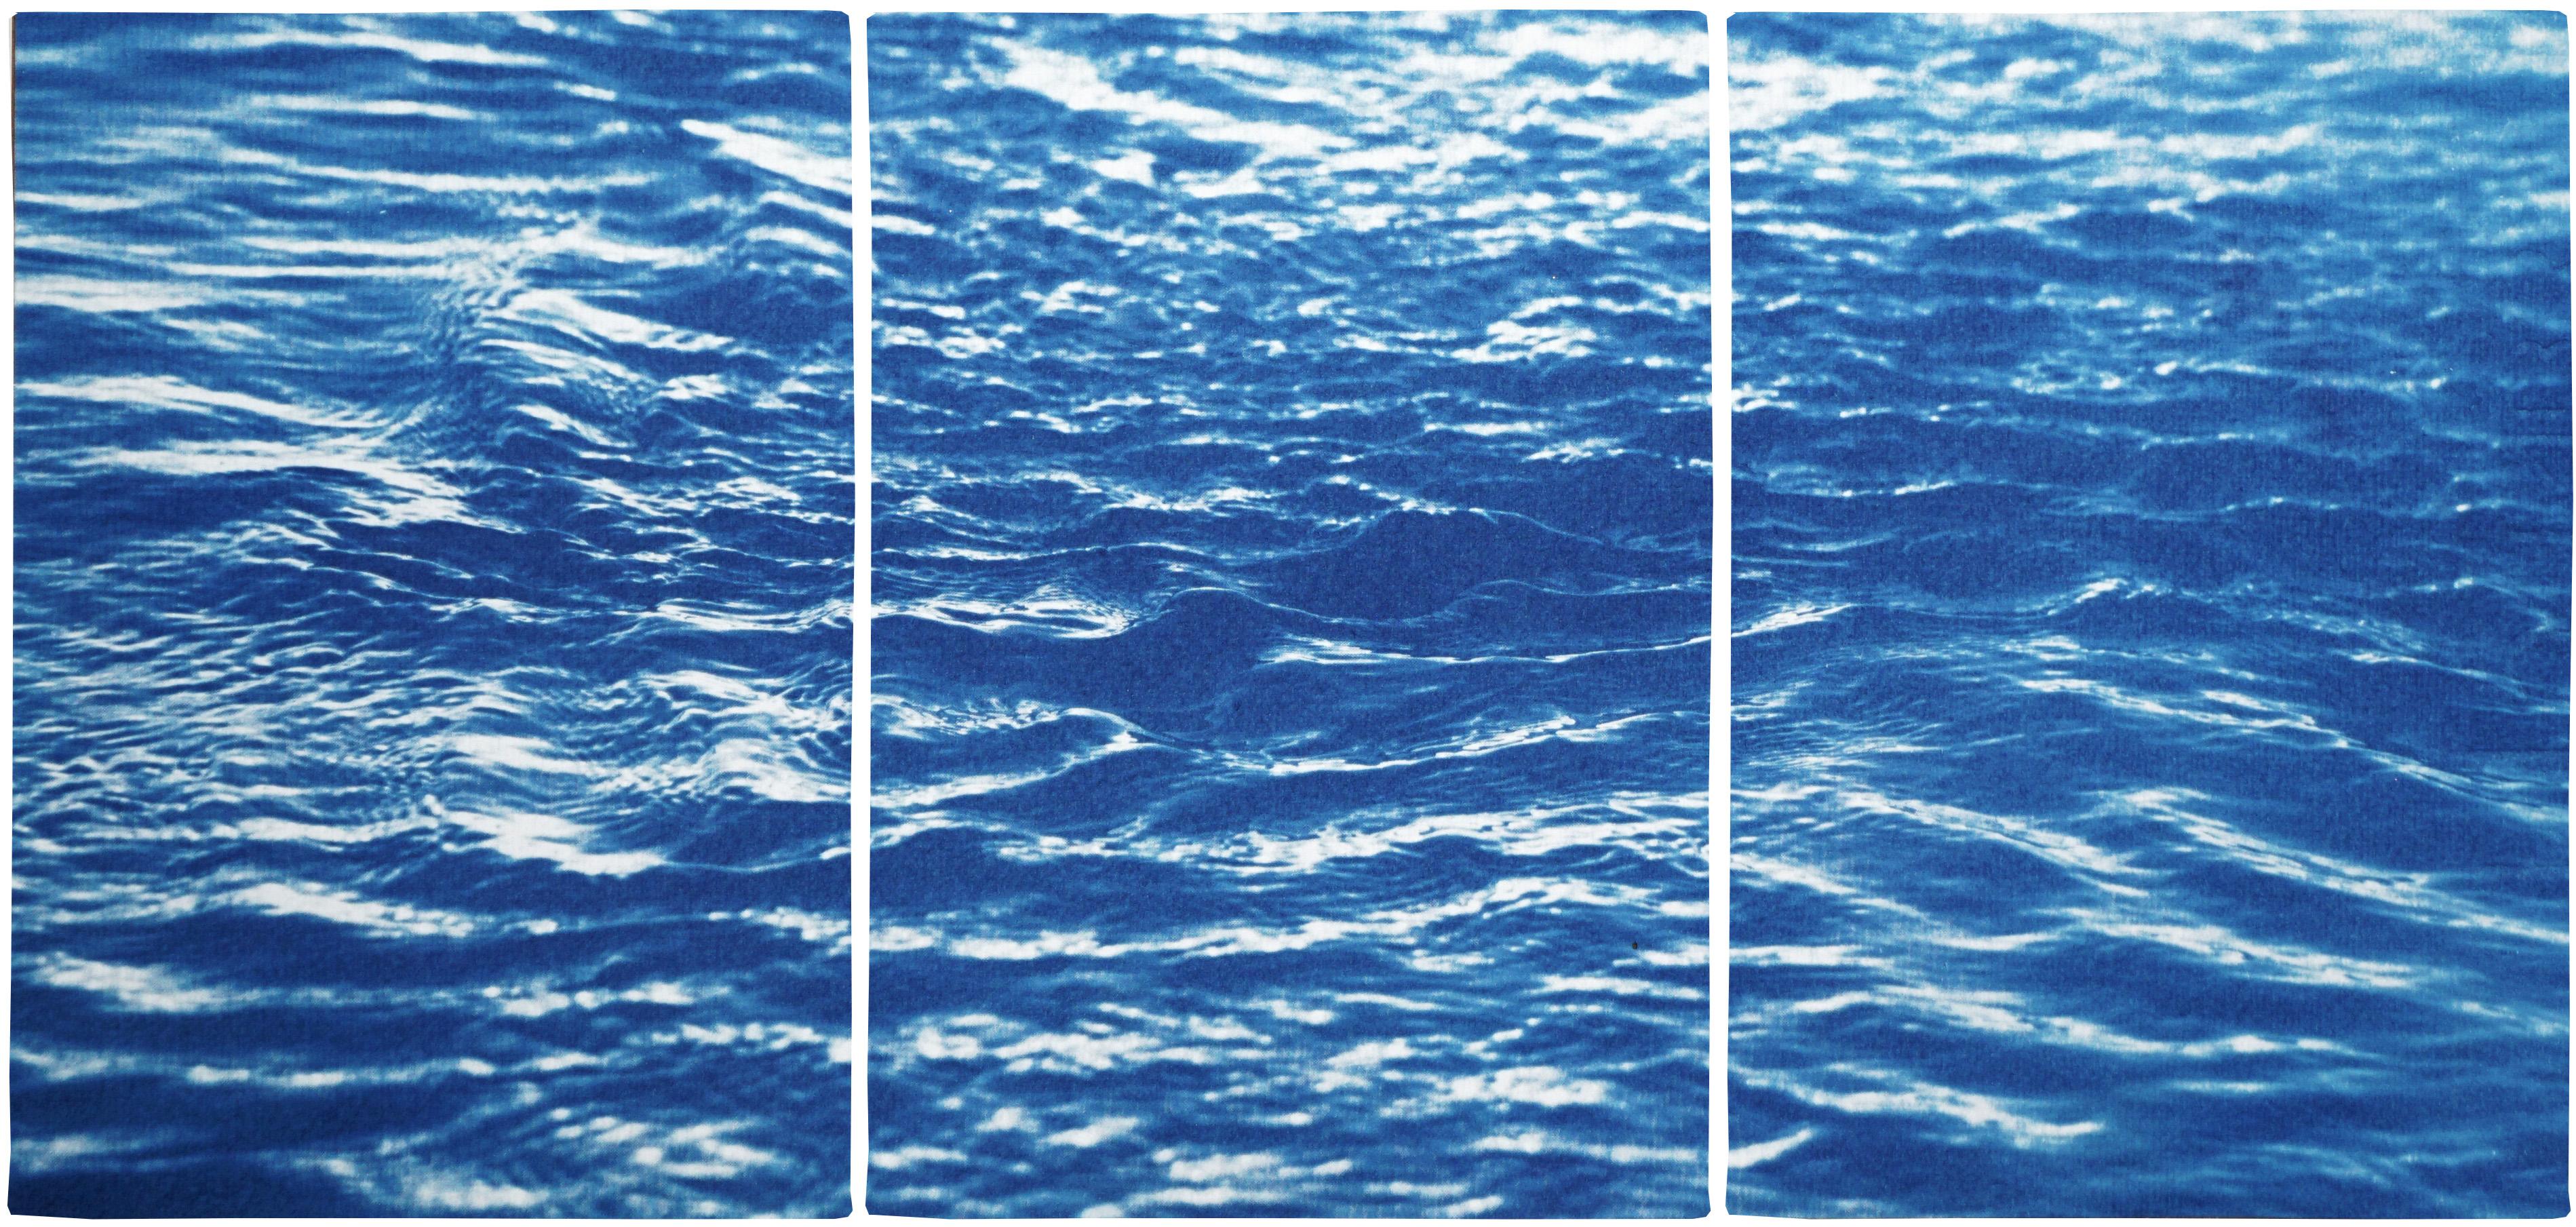 Colorado River Triptych of Refreshing River Flow, Set of Three Cyanotypes, Blue